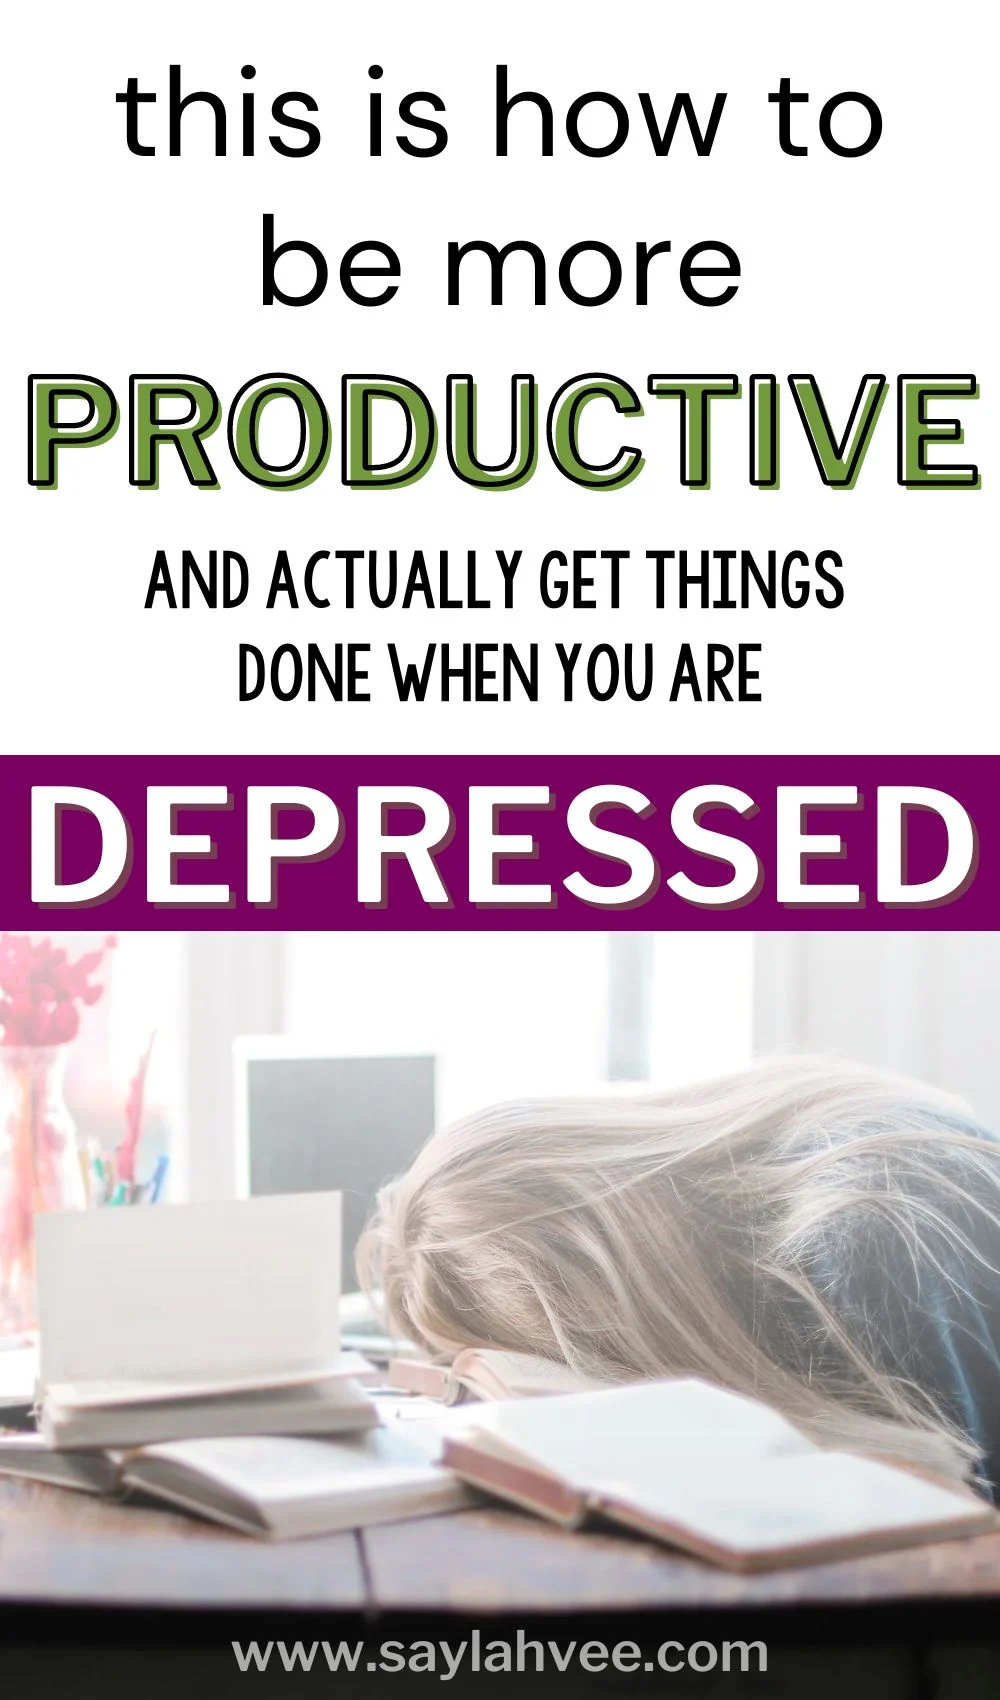 this is how to be more productive and actually get things done when you are depressed